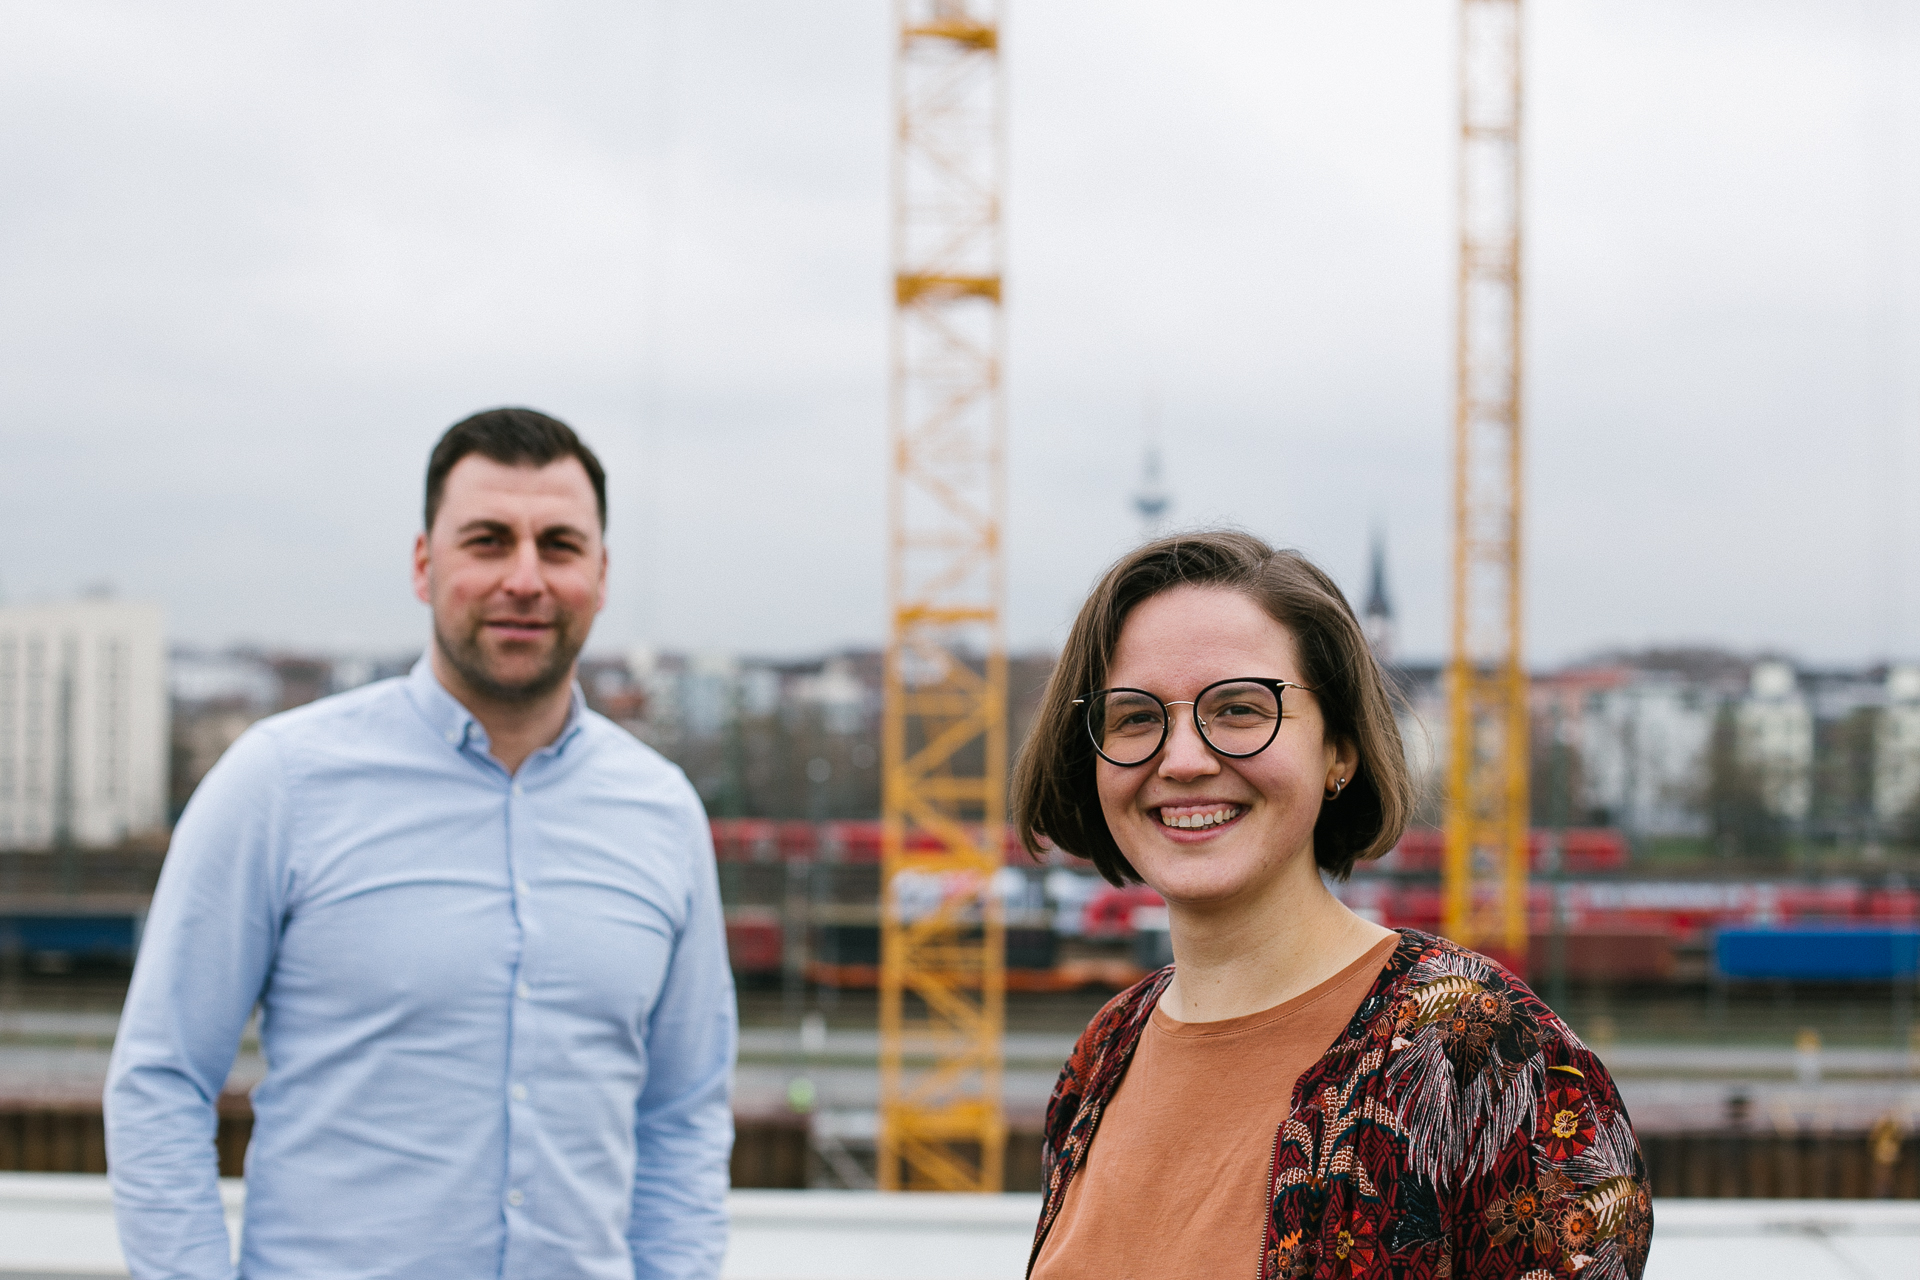 Get to know our ONBOARDING-Team, Anna and Burak – they’ll support you individually and create the perfect problem solution fit.